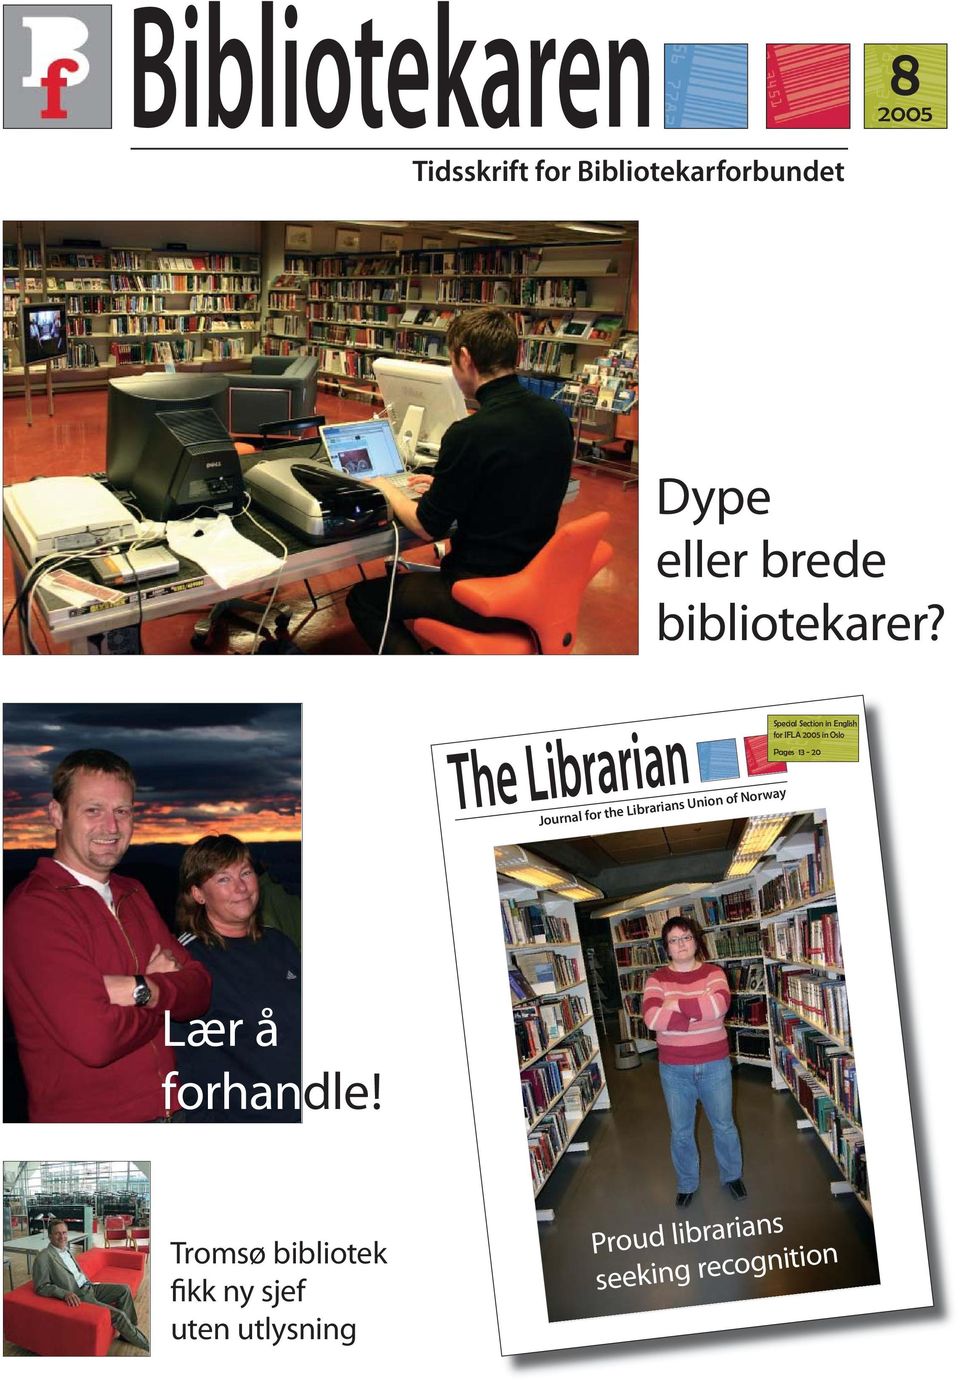 Librarians Union of Norway Special Section in English for IFLA 2005 in Oslo Pages 13-20 Section in